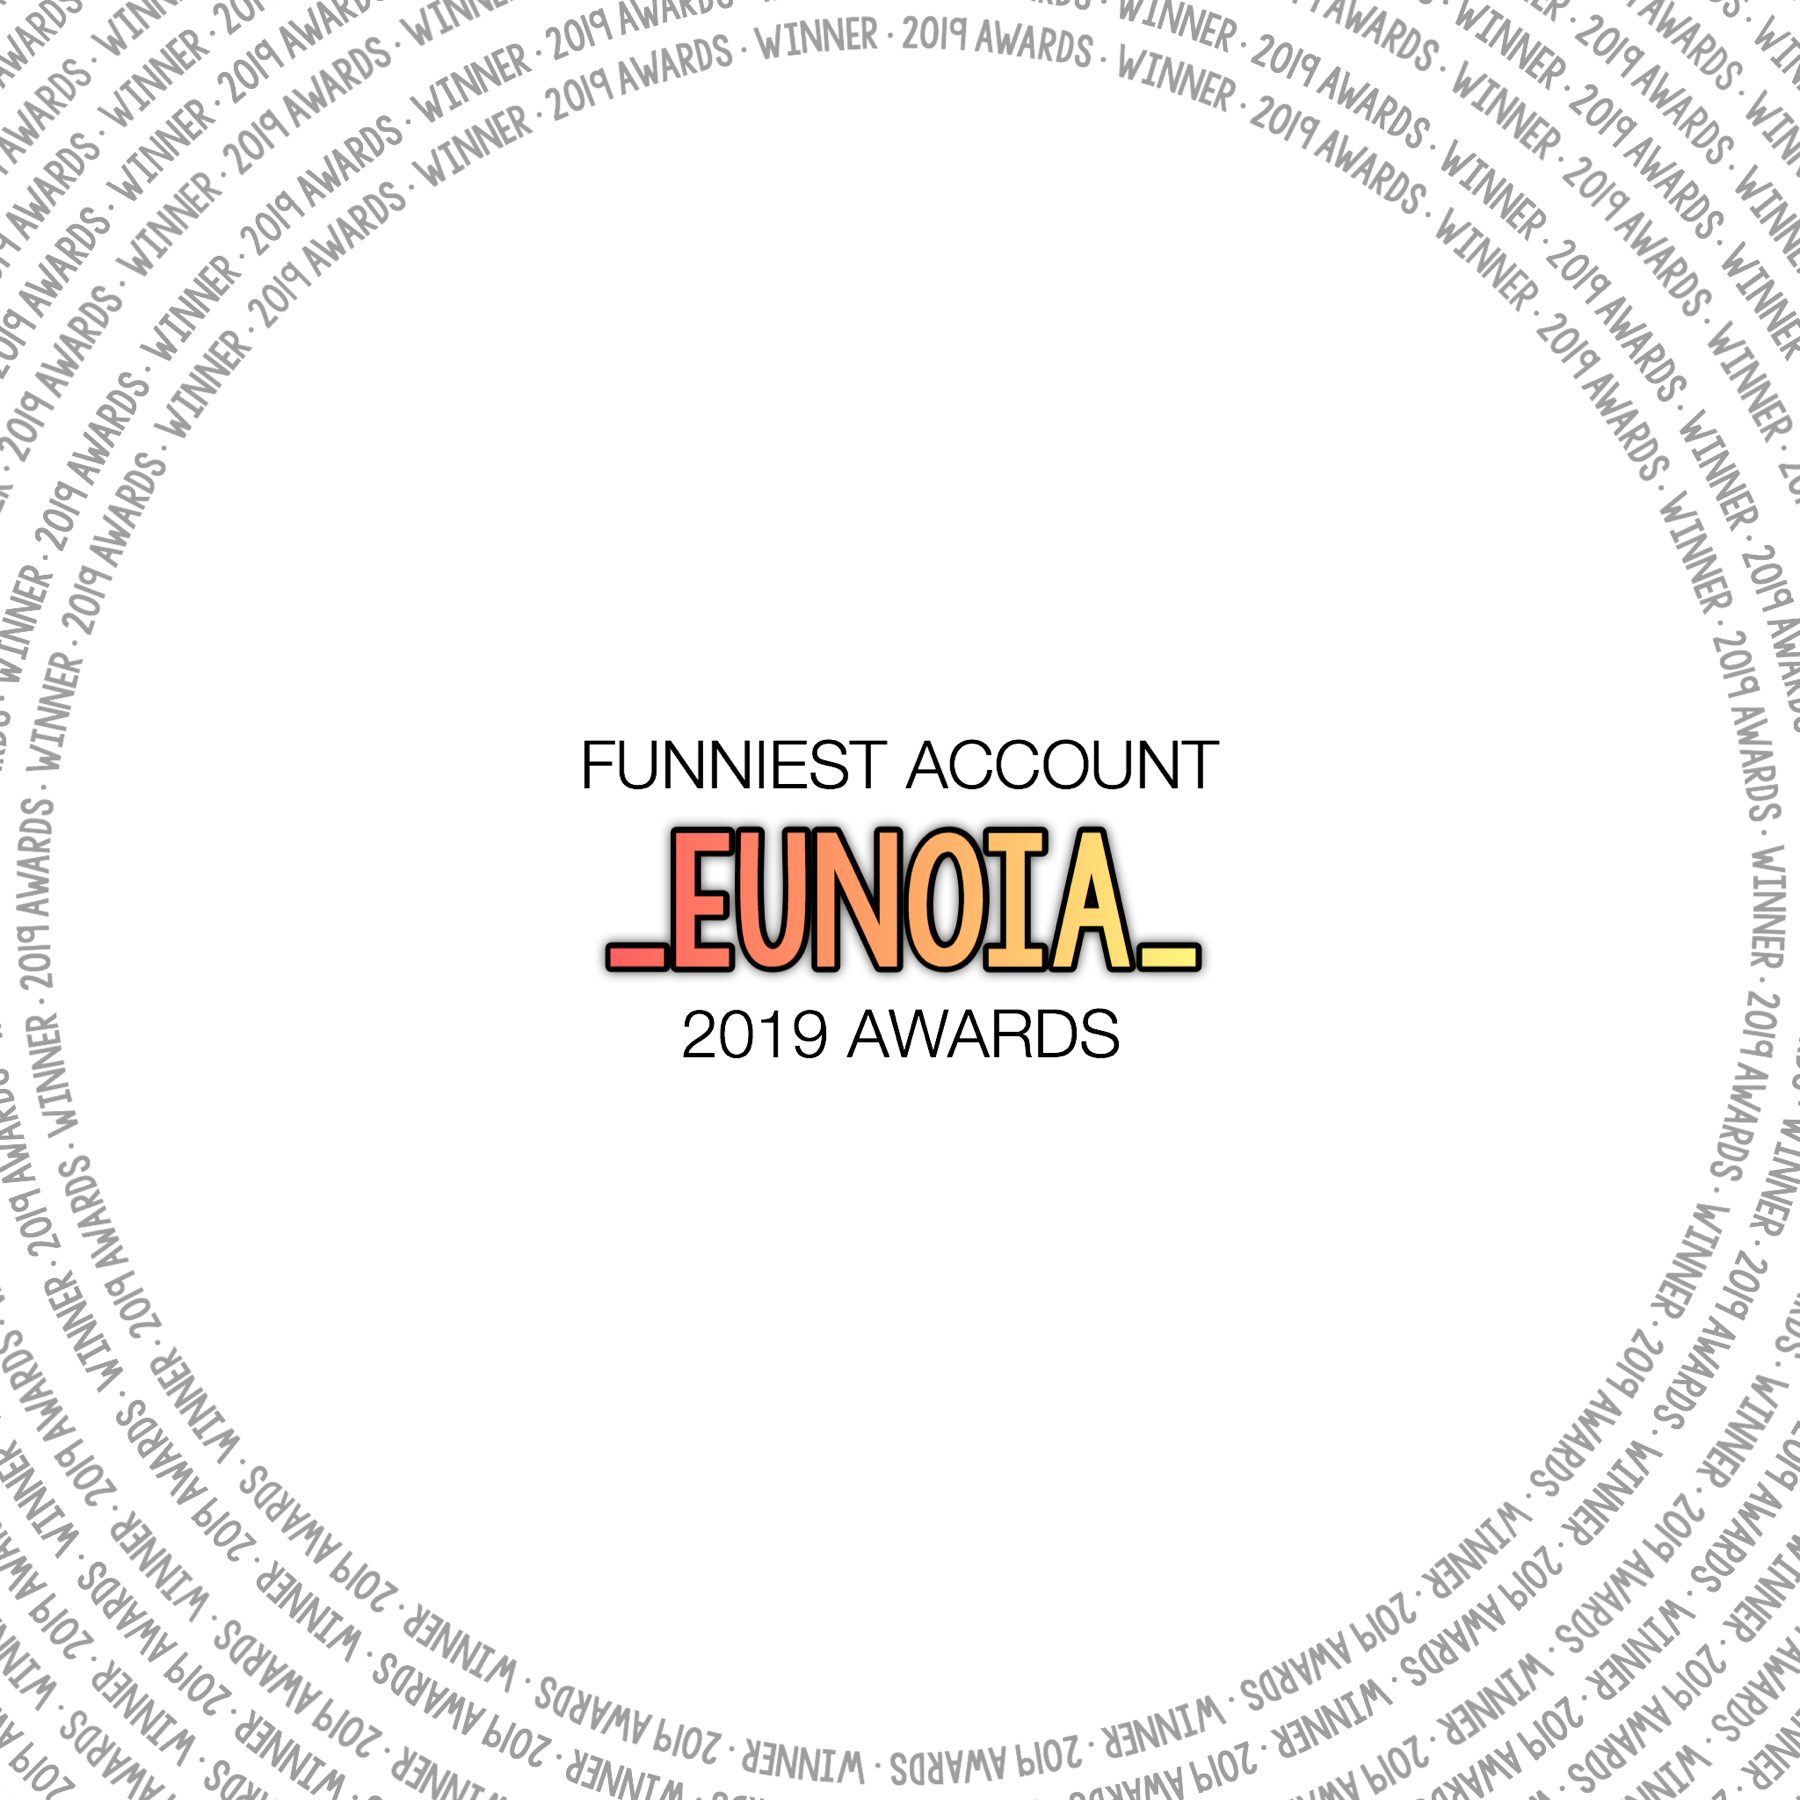 Congratulations @_eunoia_!

The vote count will be in the remixes